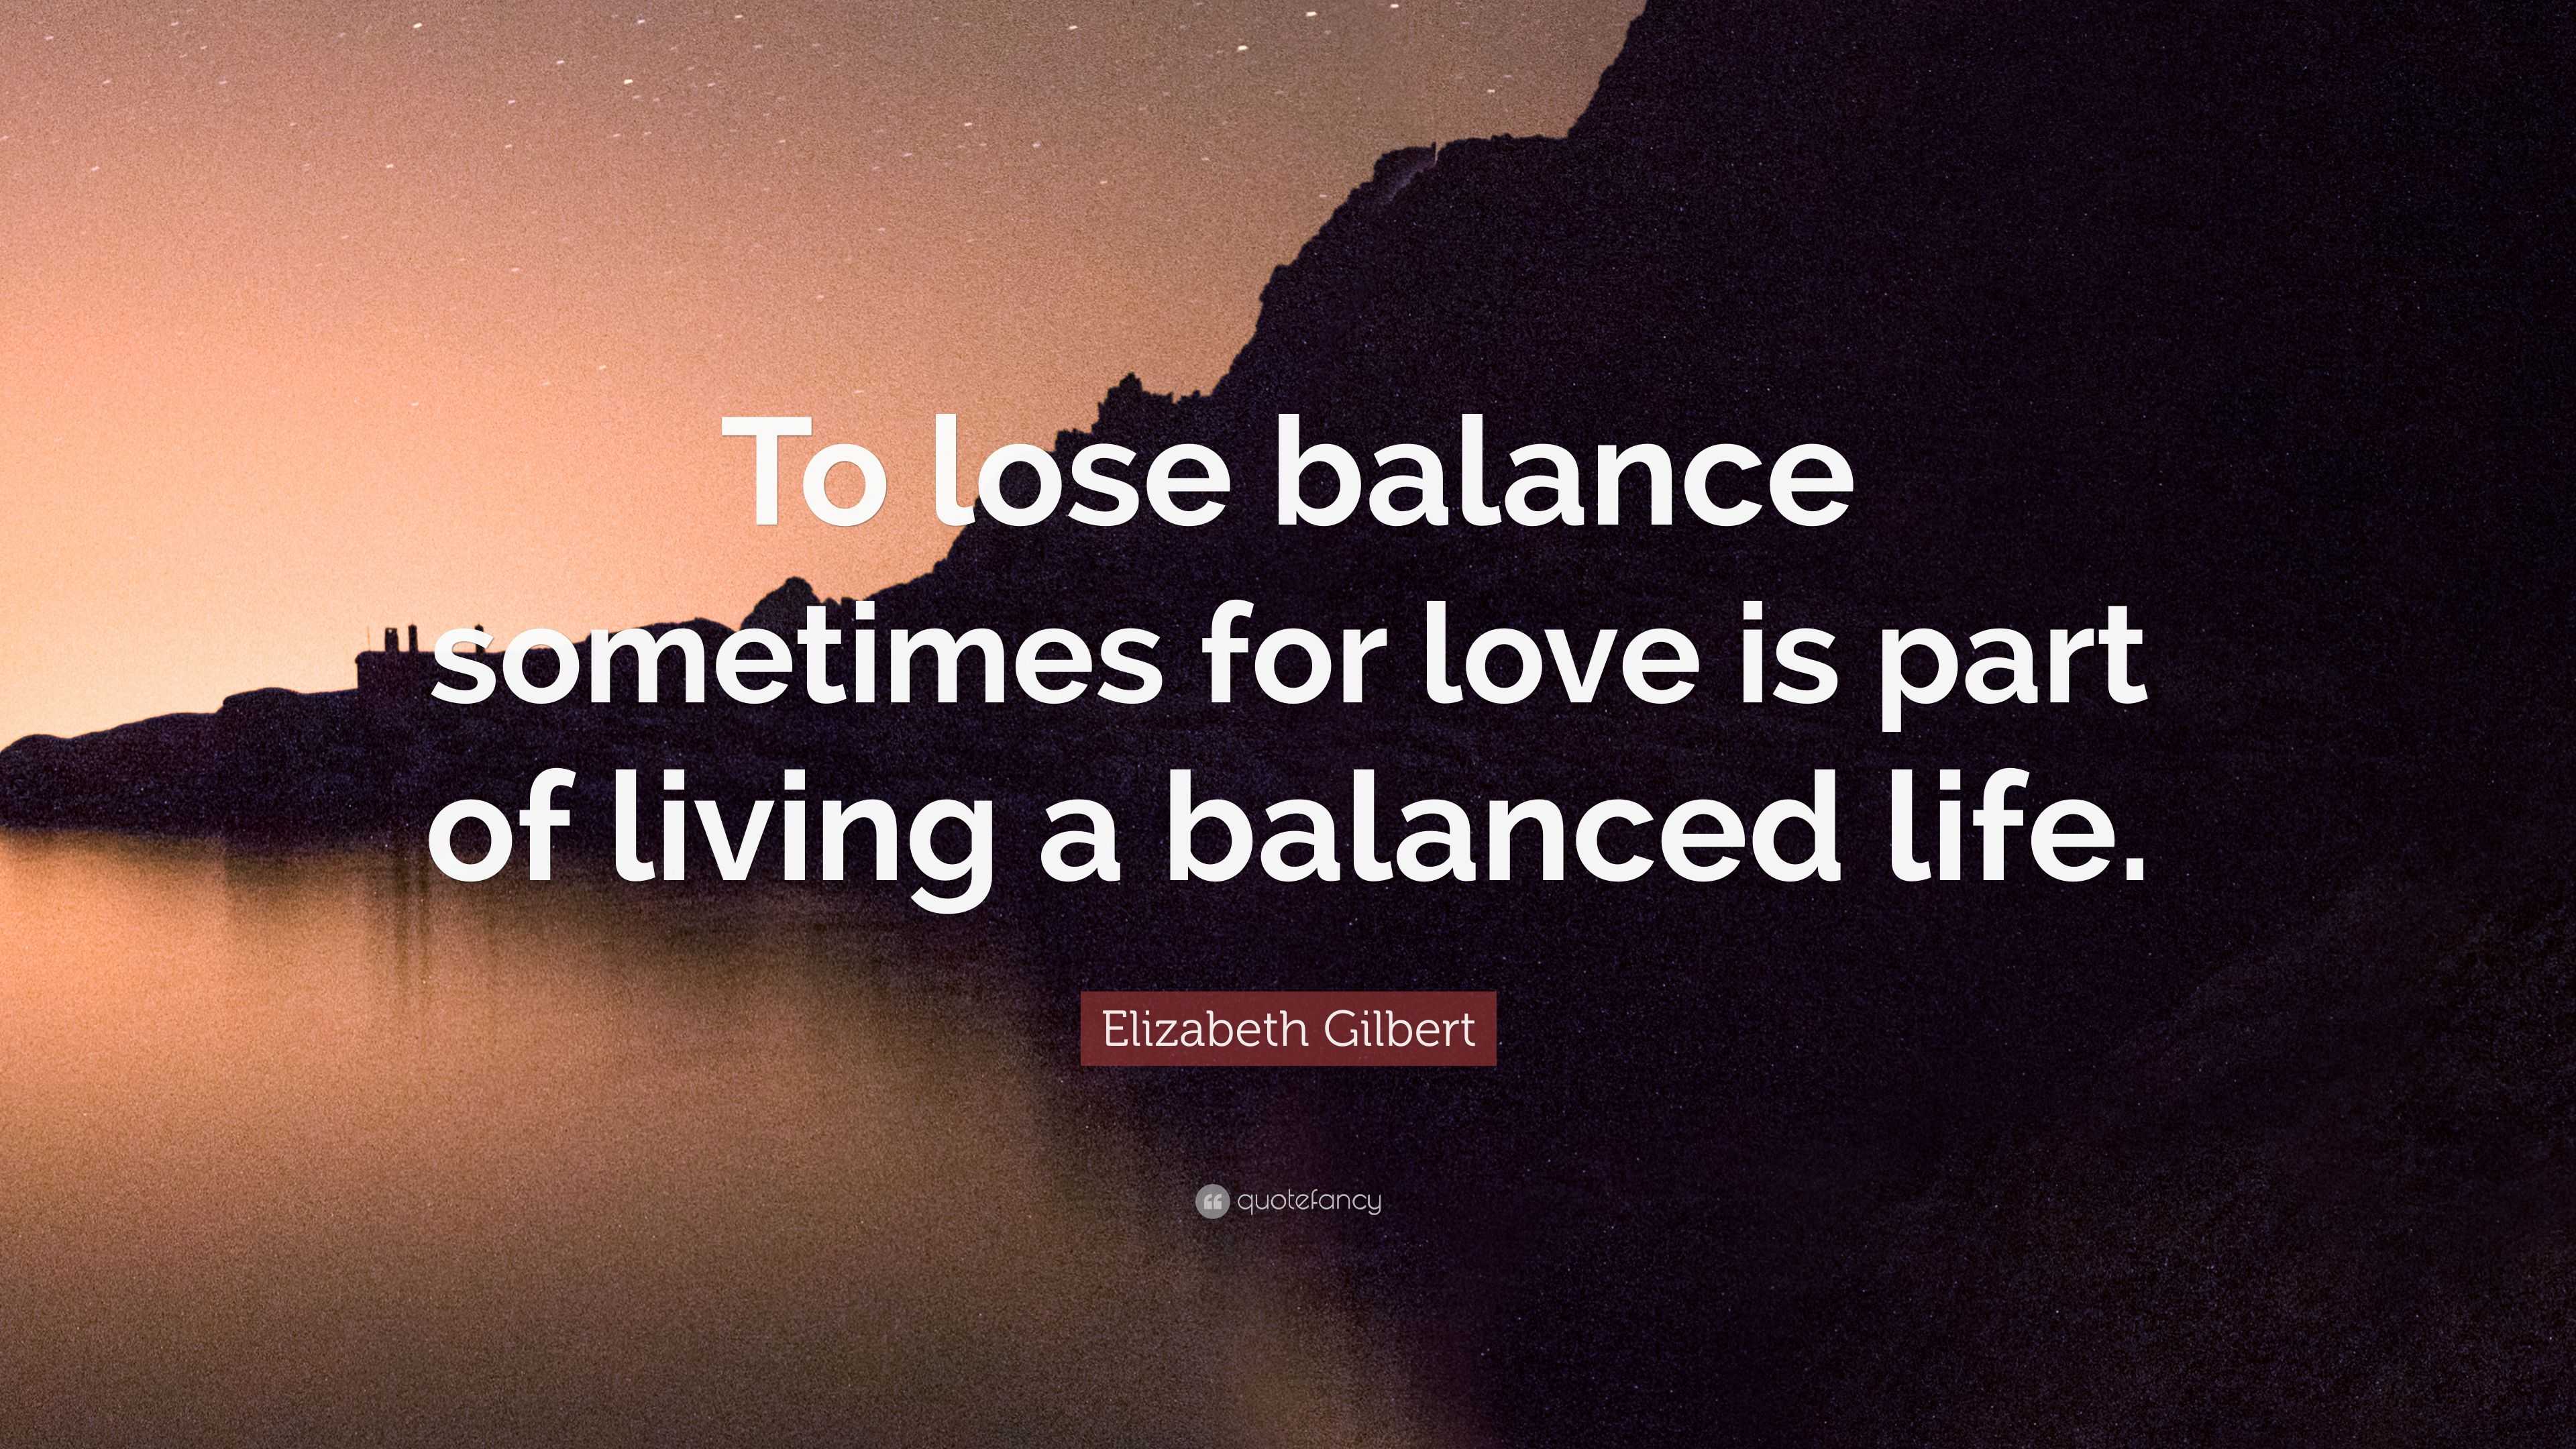 Elizabeth Gilbert Quote “To lose balance sometimes for love is part of living a